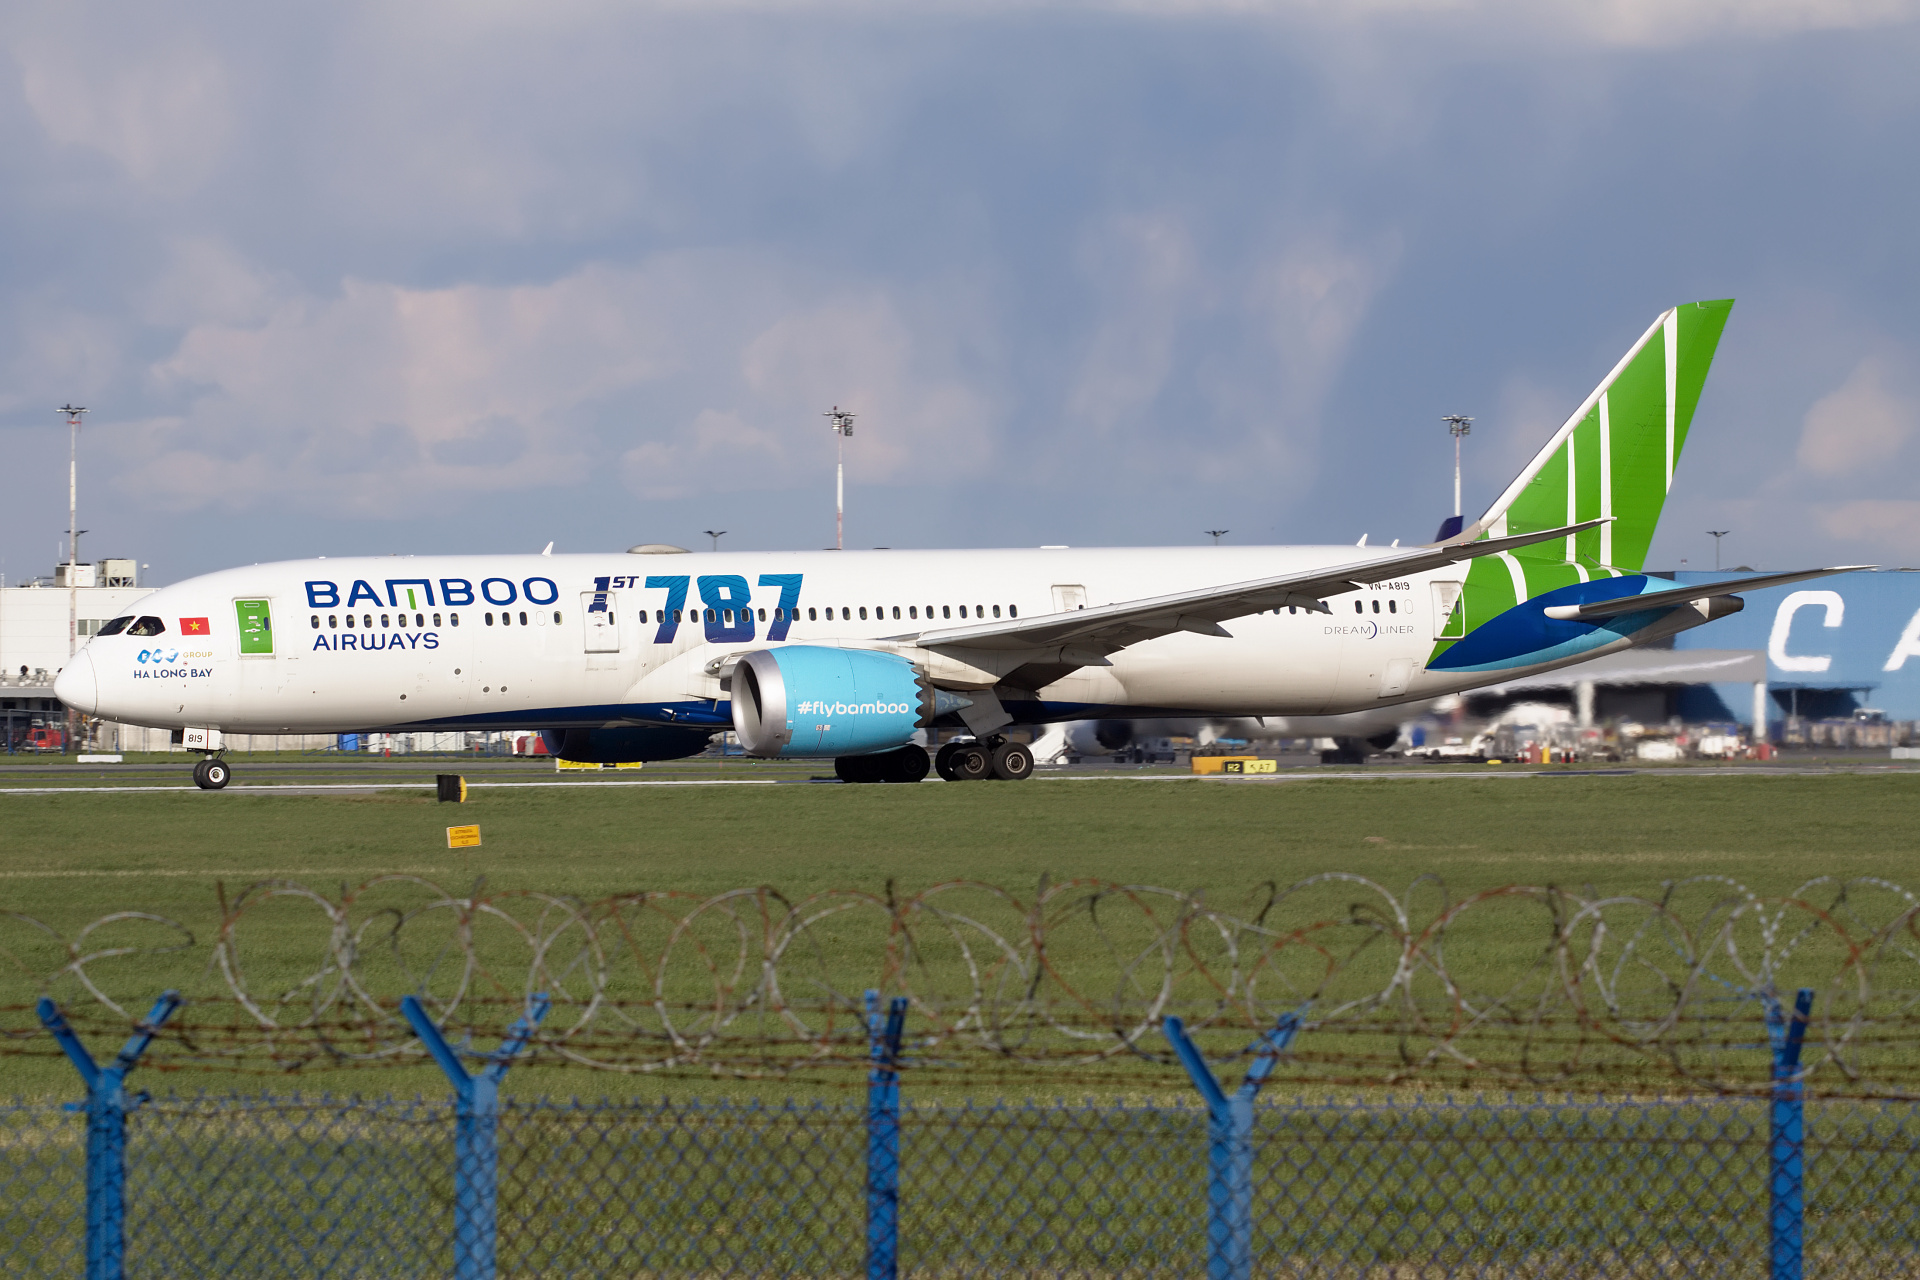 VN-A819, Bamboo Airways (Aircraft » EPWA Spotting » Boeing 787-9 Dreamliner)